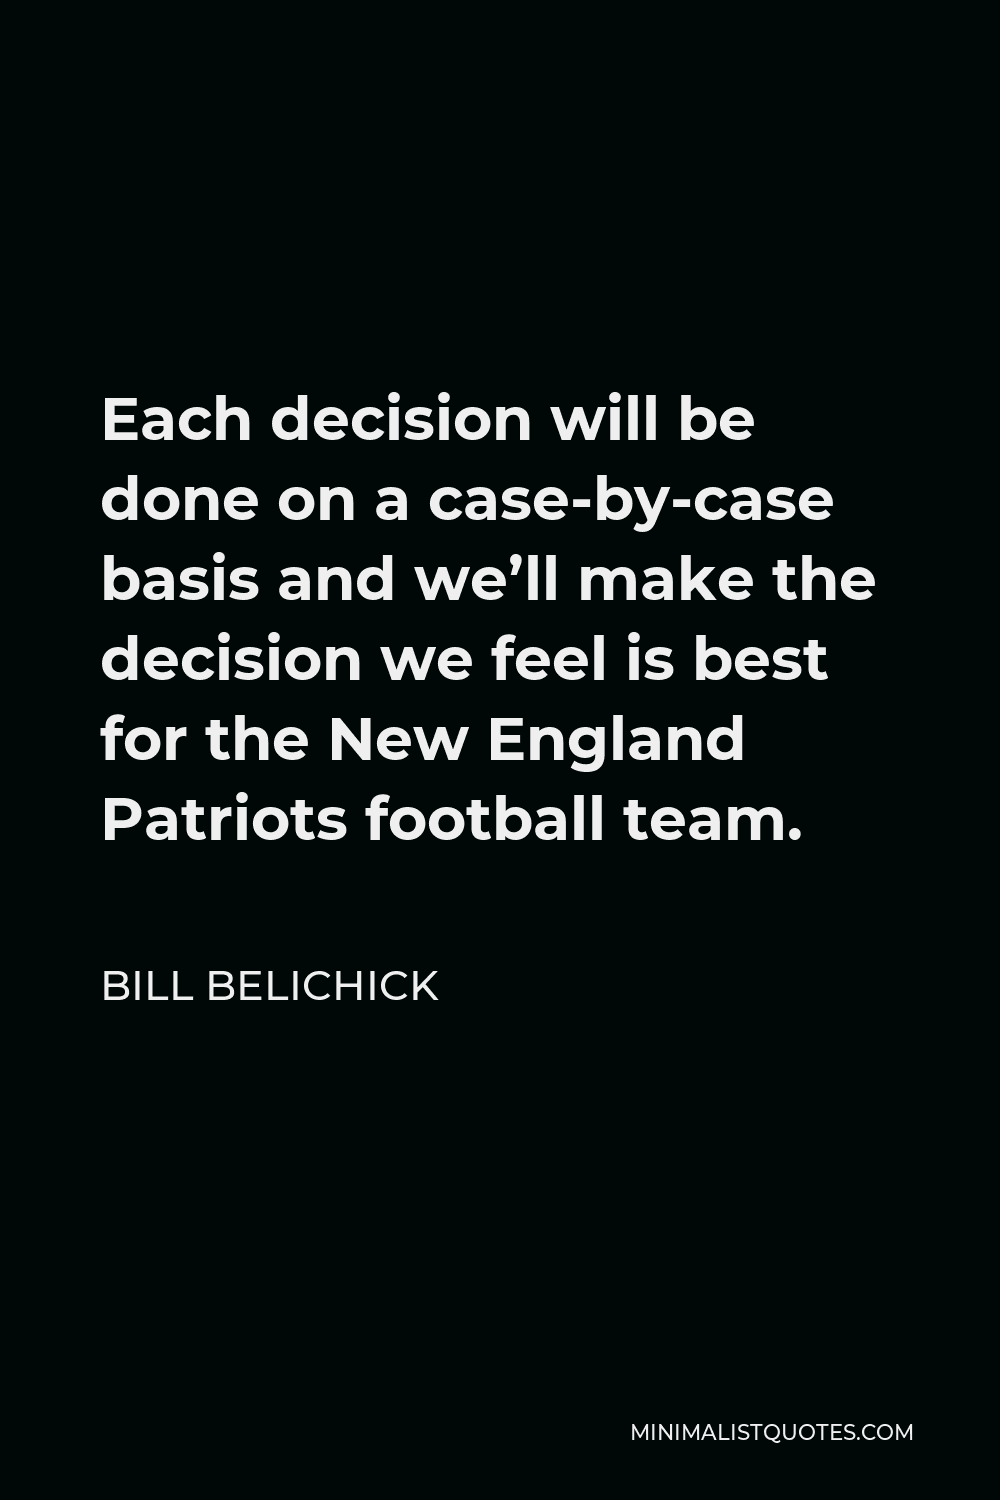 Bill Belichick Quote - Each decision will be done on a case-by-case basis and we’ll make the decision we feel is best for the New England Patriots football team.